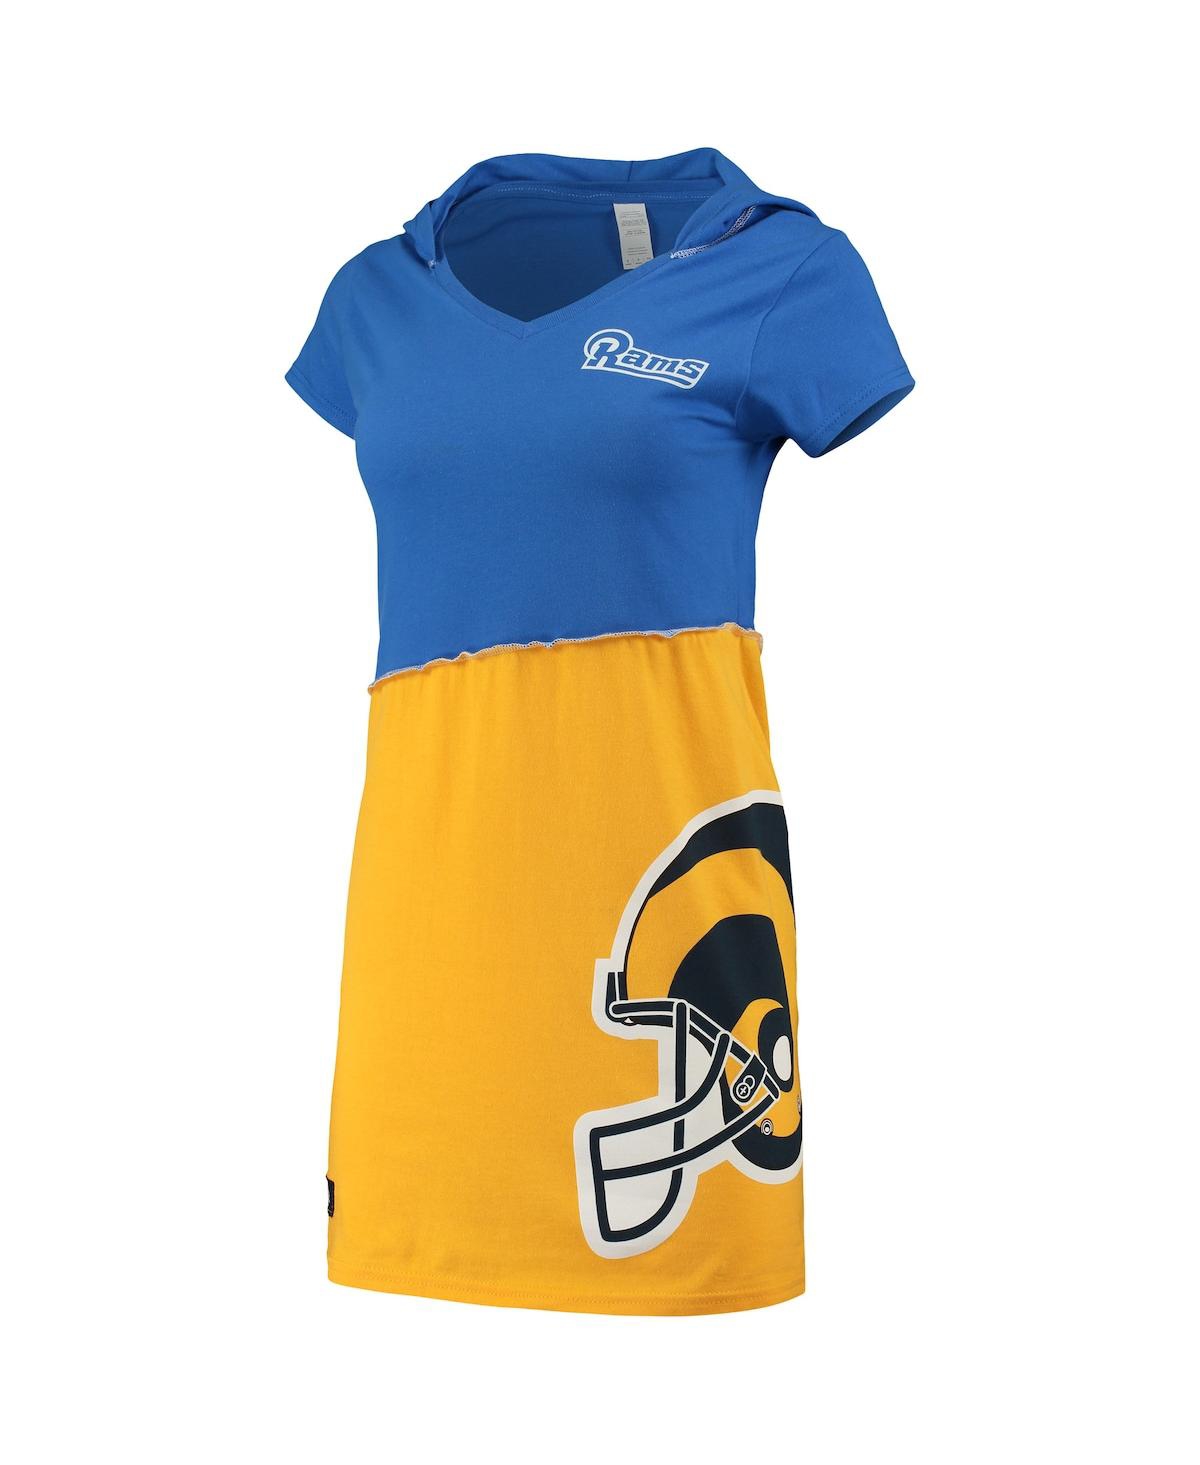 Women's Refried Apparel Royal and Gold Los Angeles Rams Hooded Mini Dress - Royal, Gold